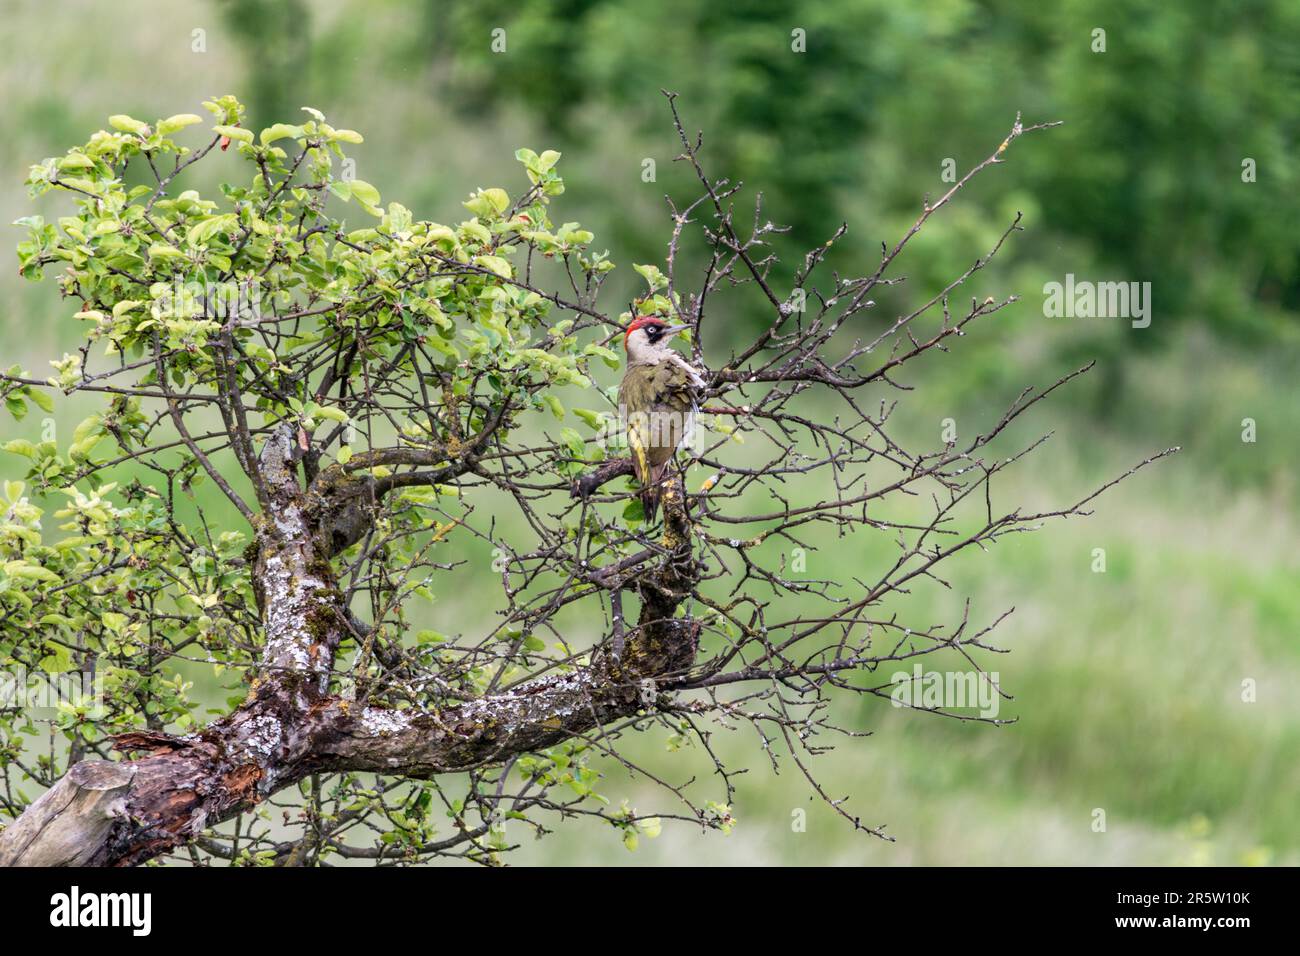 The green woodpecker (Picus viridis ), the best known among the European woodpeckers, looking for insects, larvae behind the barks of the trees. Stock Photo